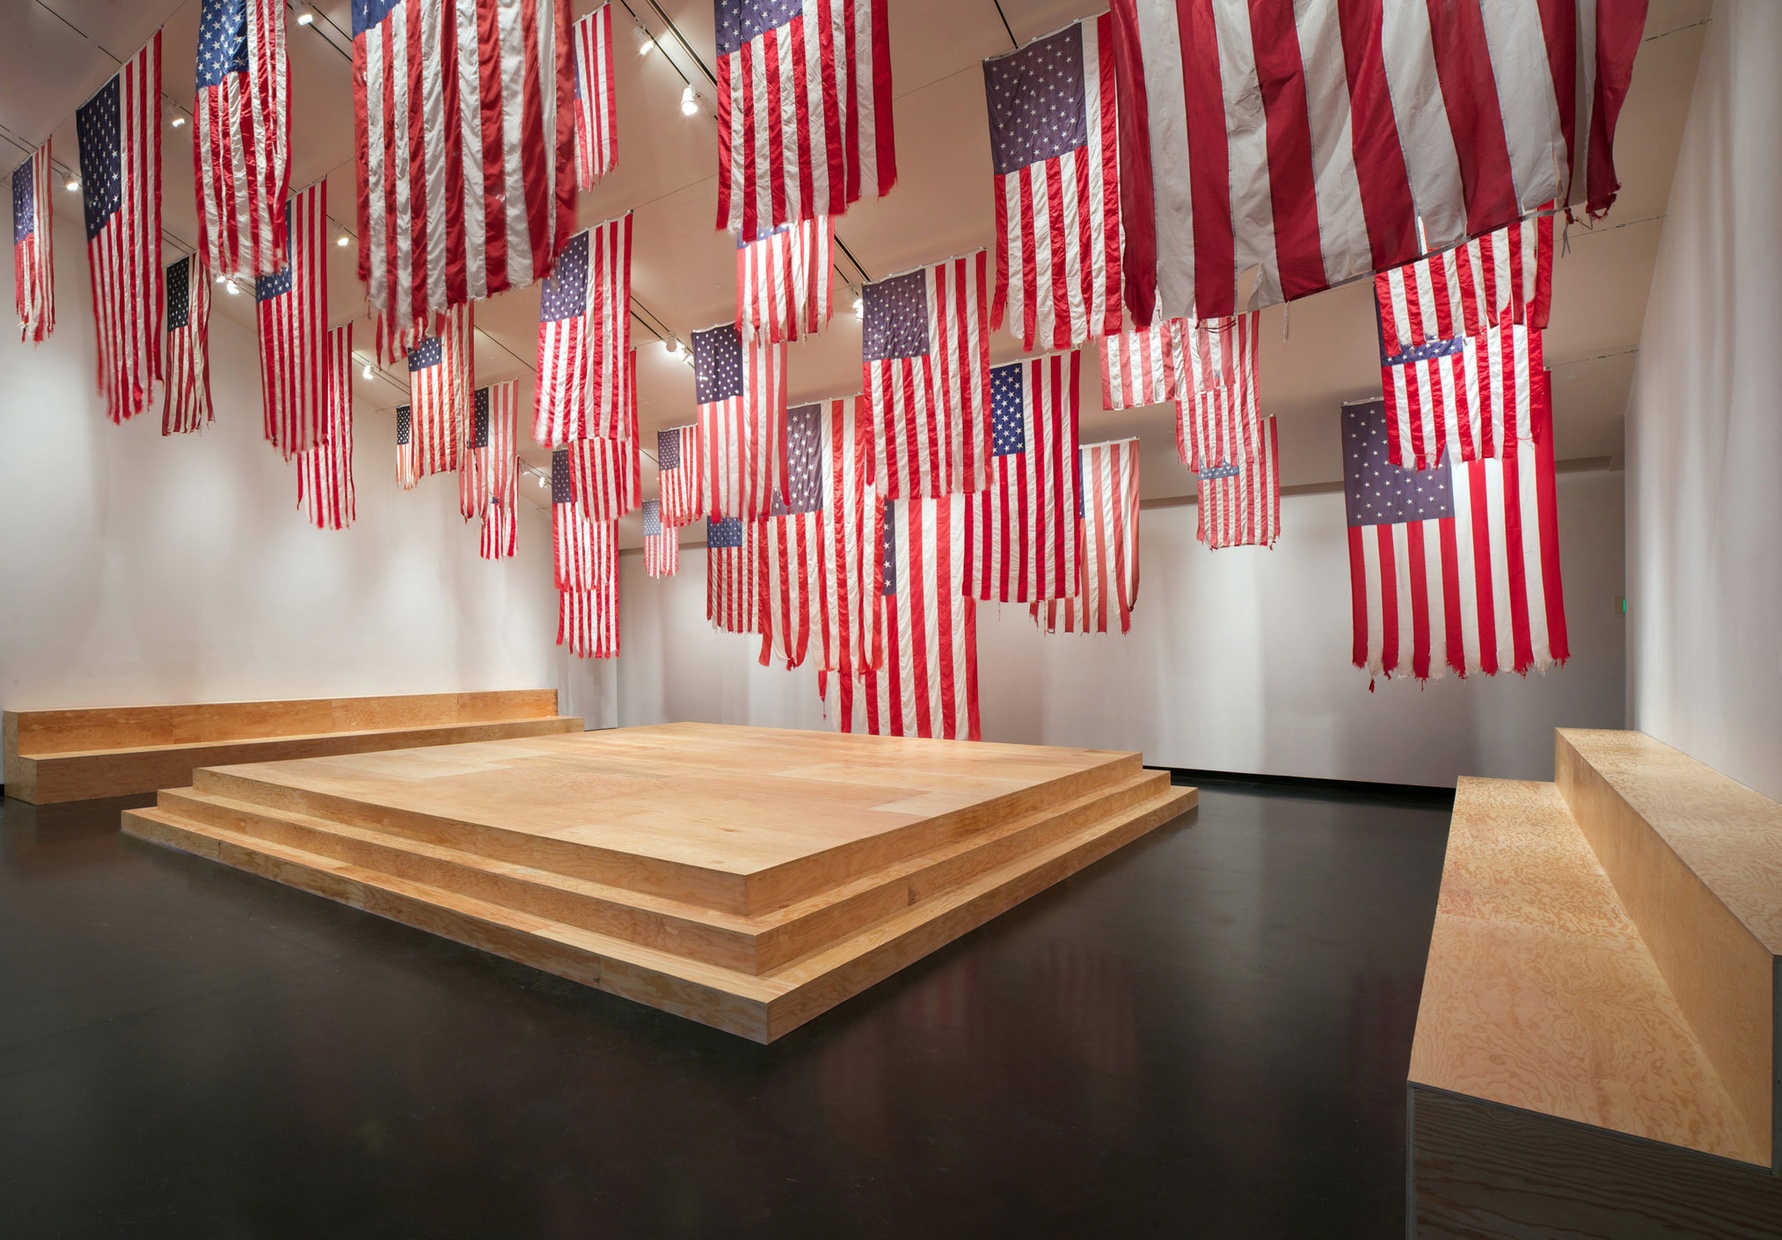 An empty room with white walls and American flags hanging from the ceiling.